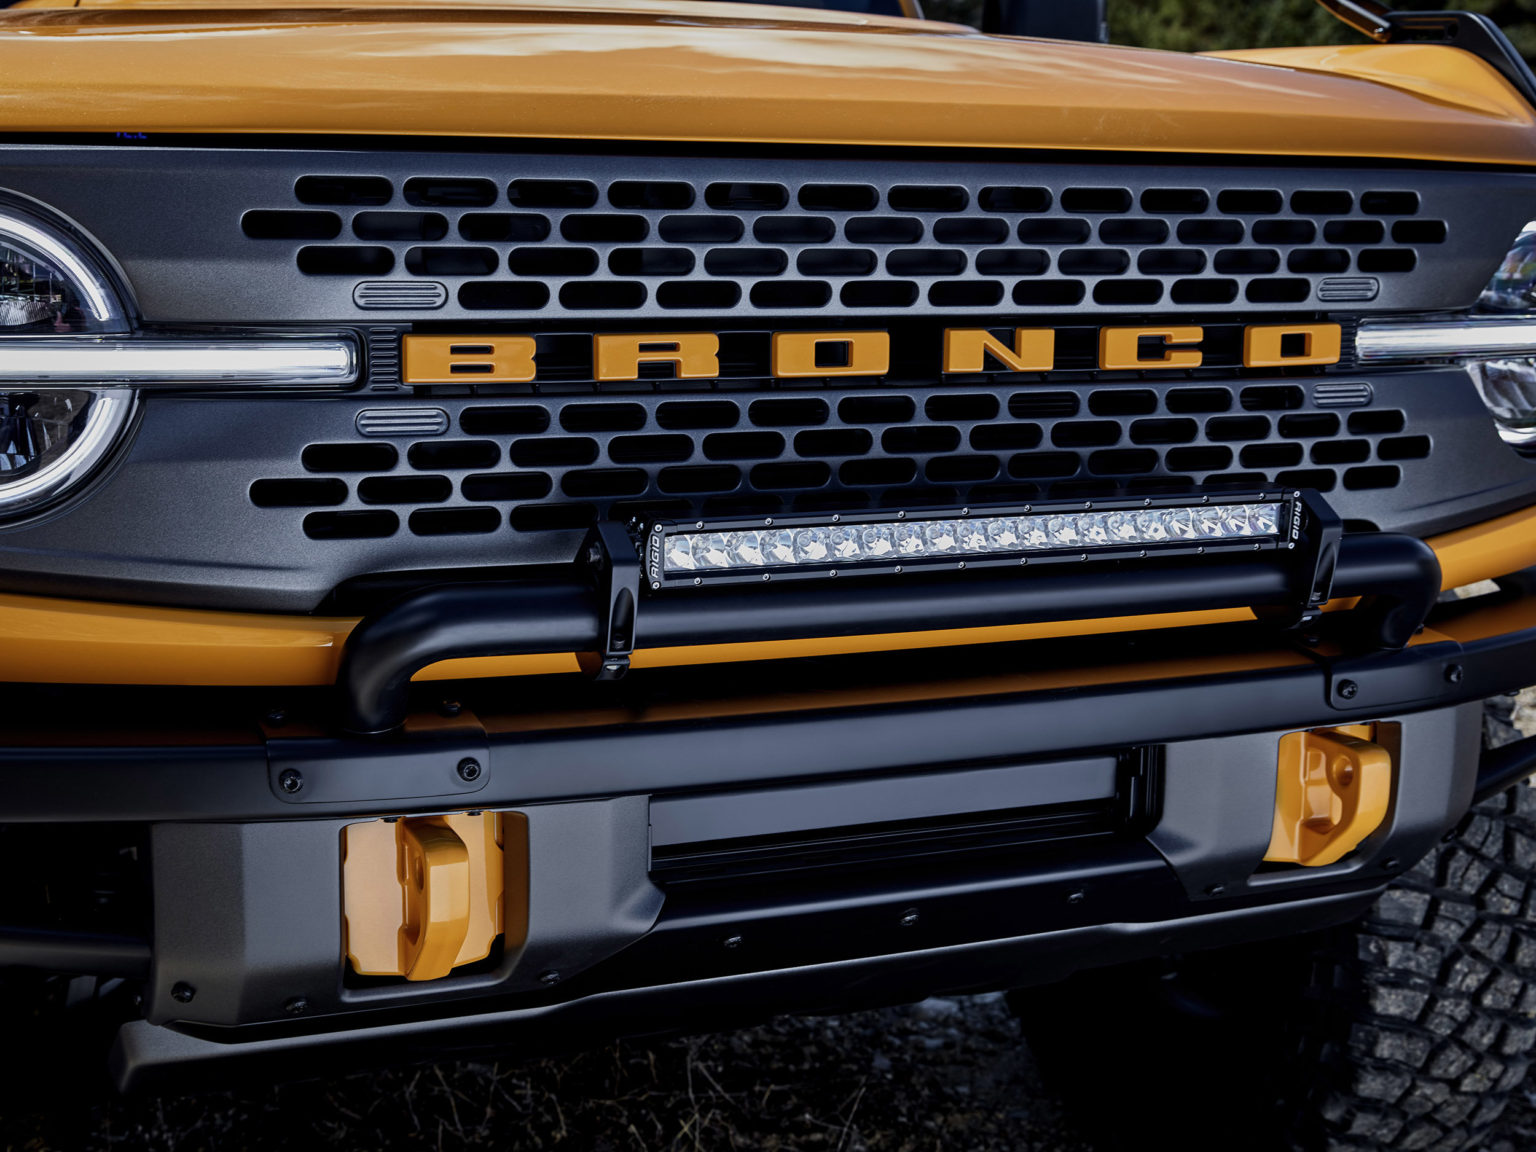 Barrett-Jackson will auction off the 2021 Ford Bronco 2-Door VIN 001 during its March dates in Scottsdale, Arizona.